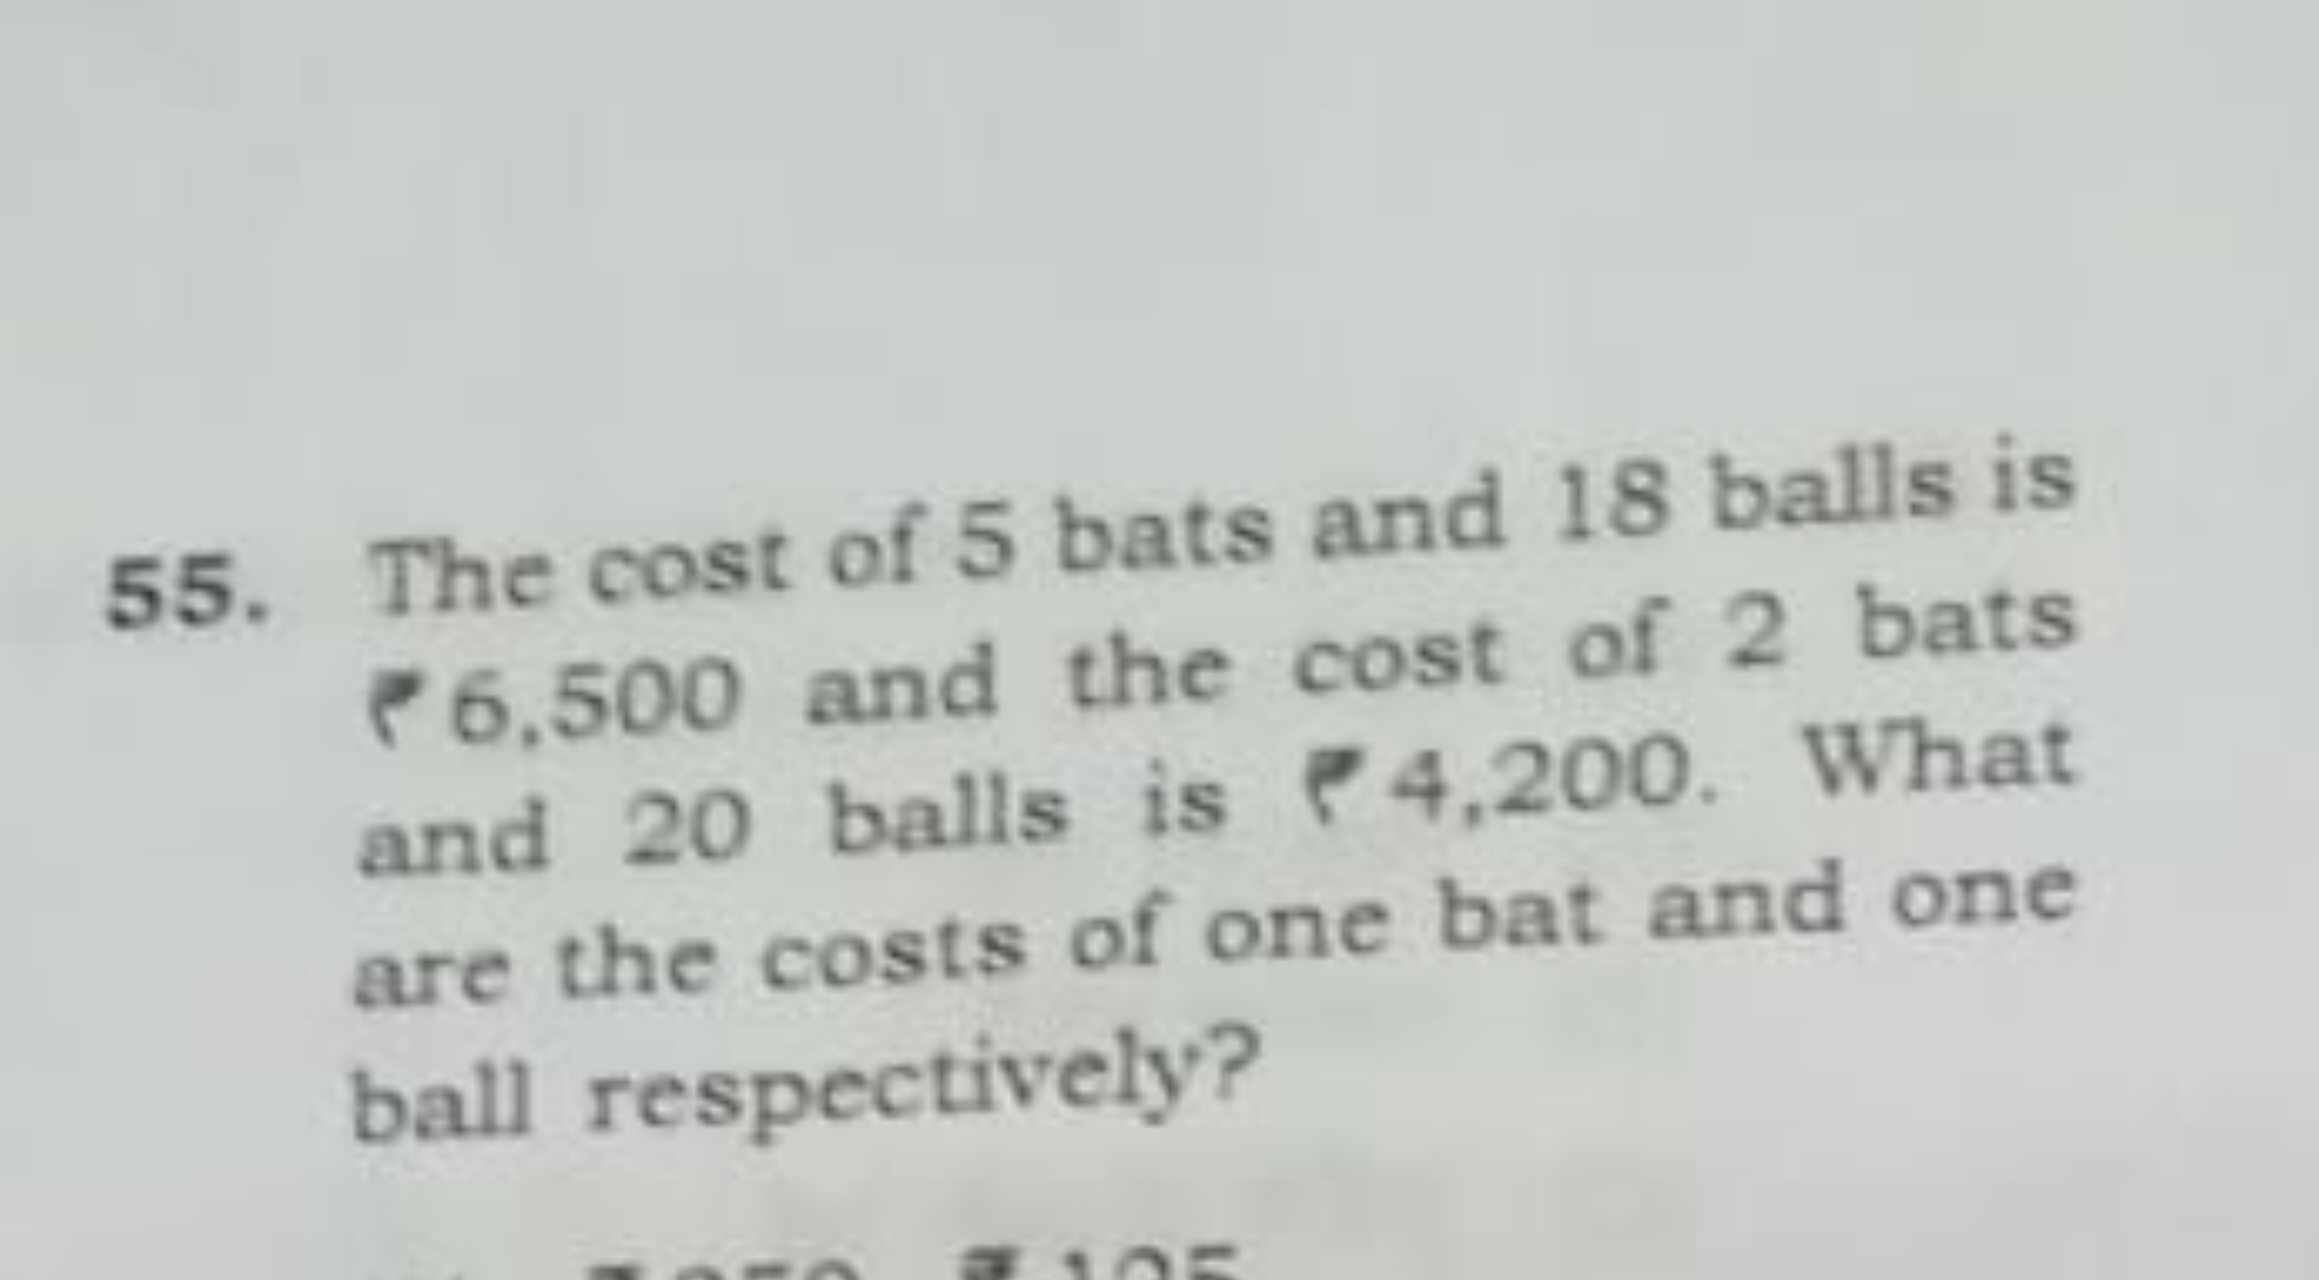 55. The cost of 5 bats and 18 balls is P 6.500 and the cost of 2 bats 